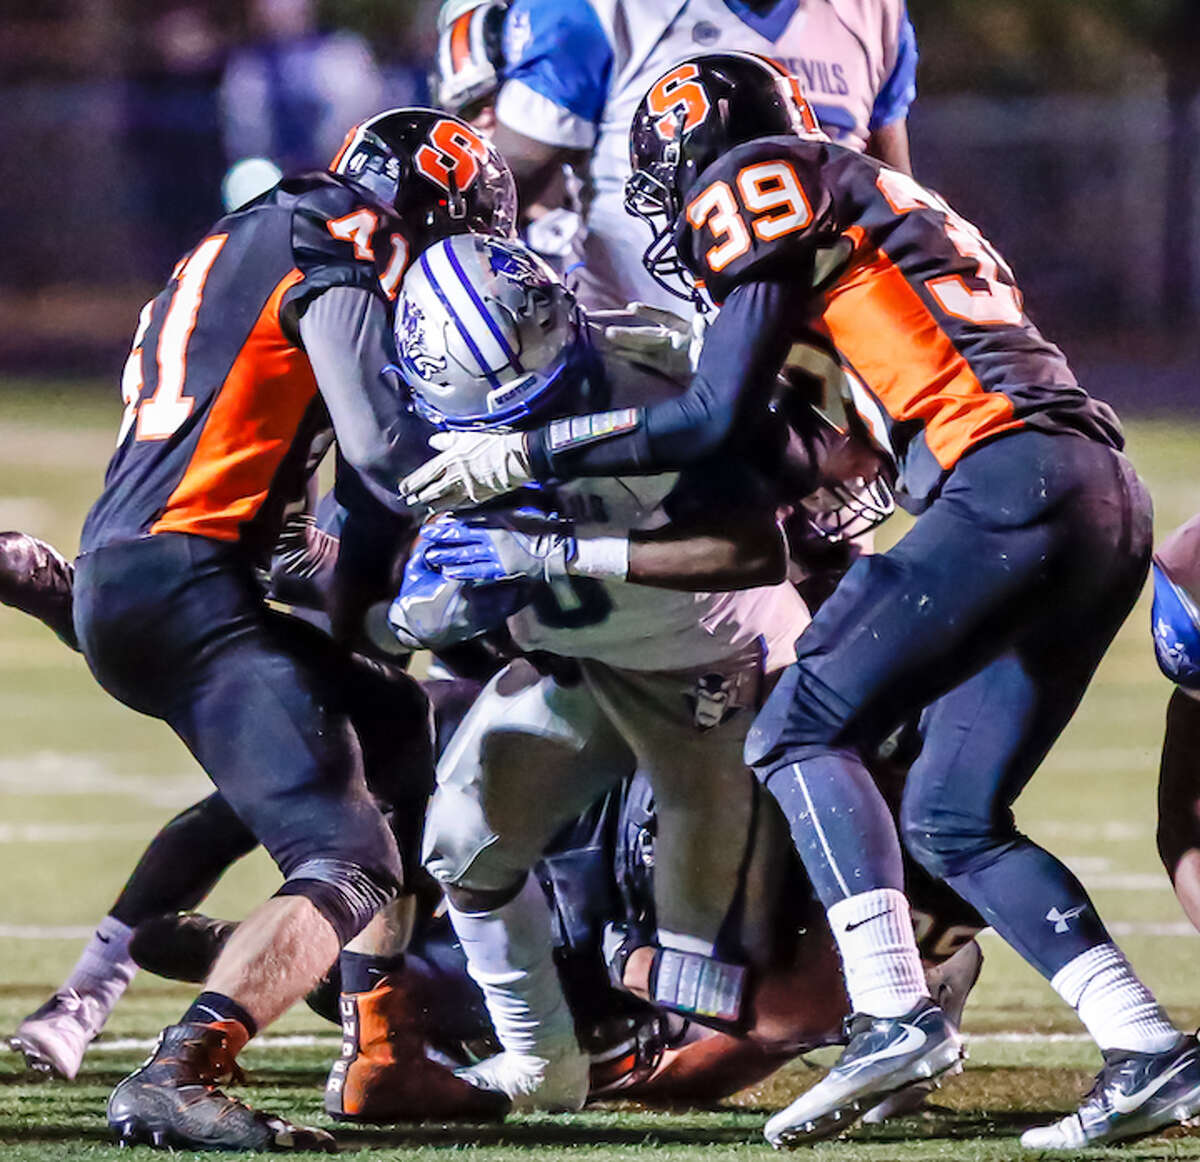 West Haven’s Anthony Godfrey battles against a tough Shelton defense during their SCC Division 1 matchup Friday evening.-John Vanacore/New Haven Register